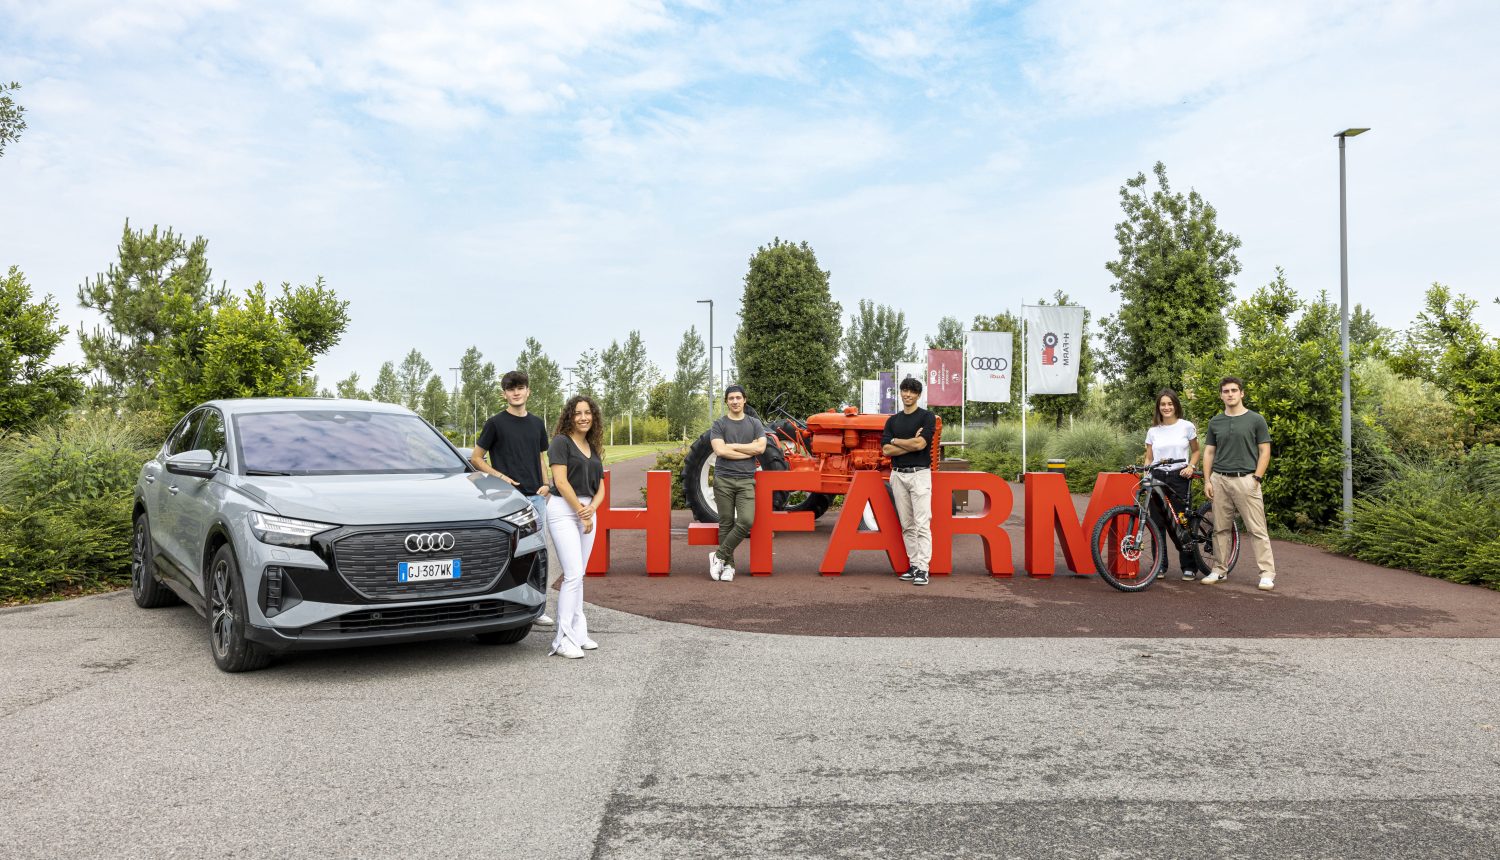 Audi and H-FARM: The new educational journey into the future